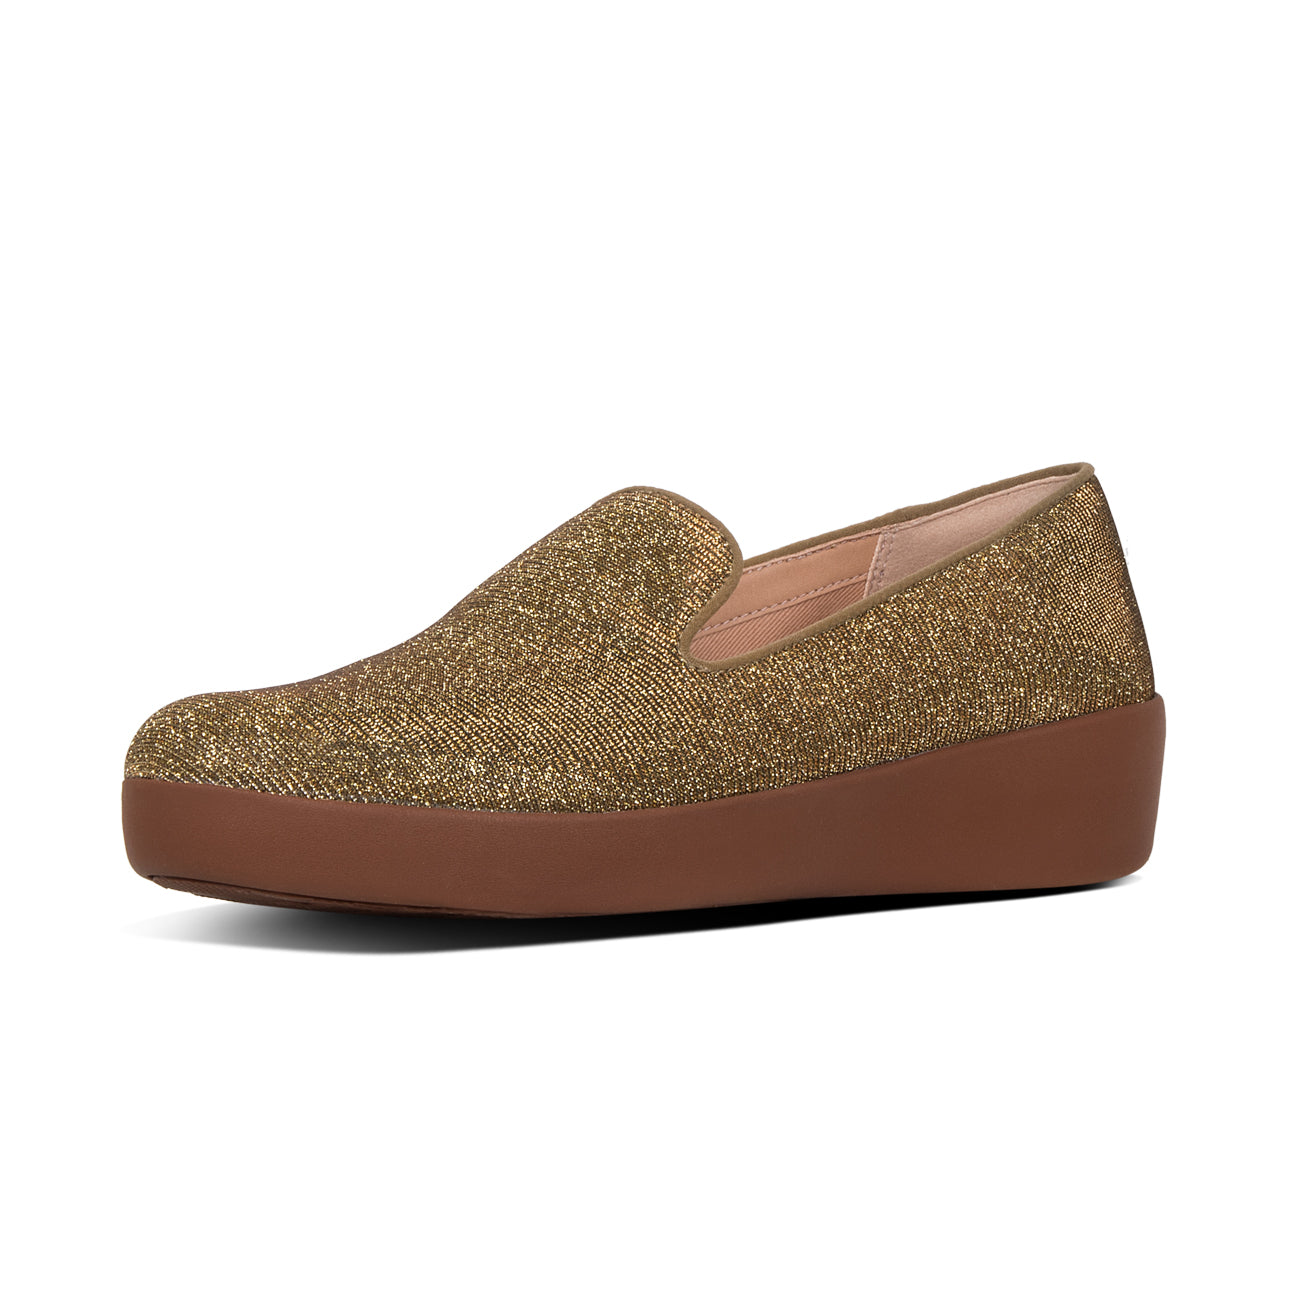 Audrey™ Glitzy Loafer